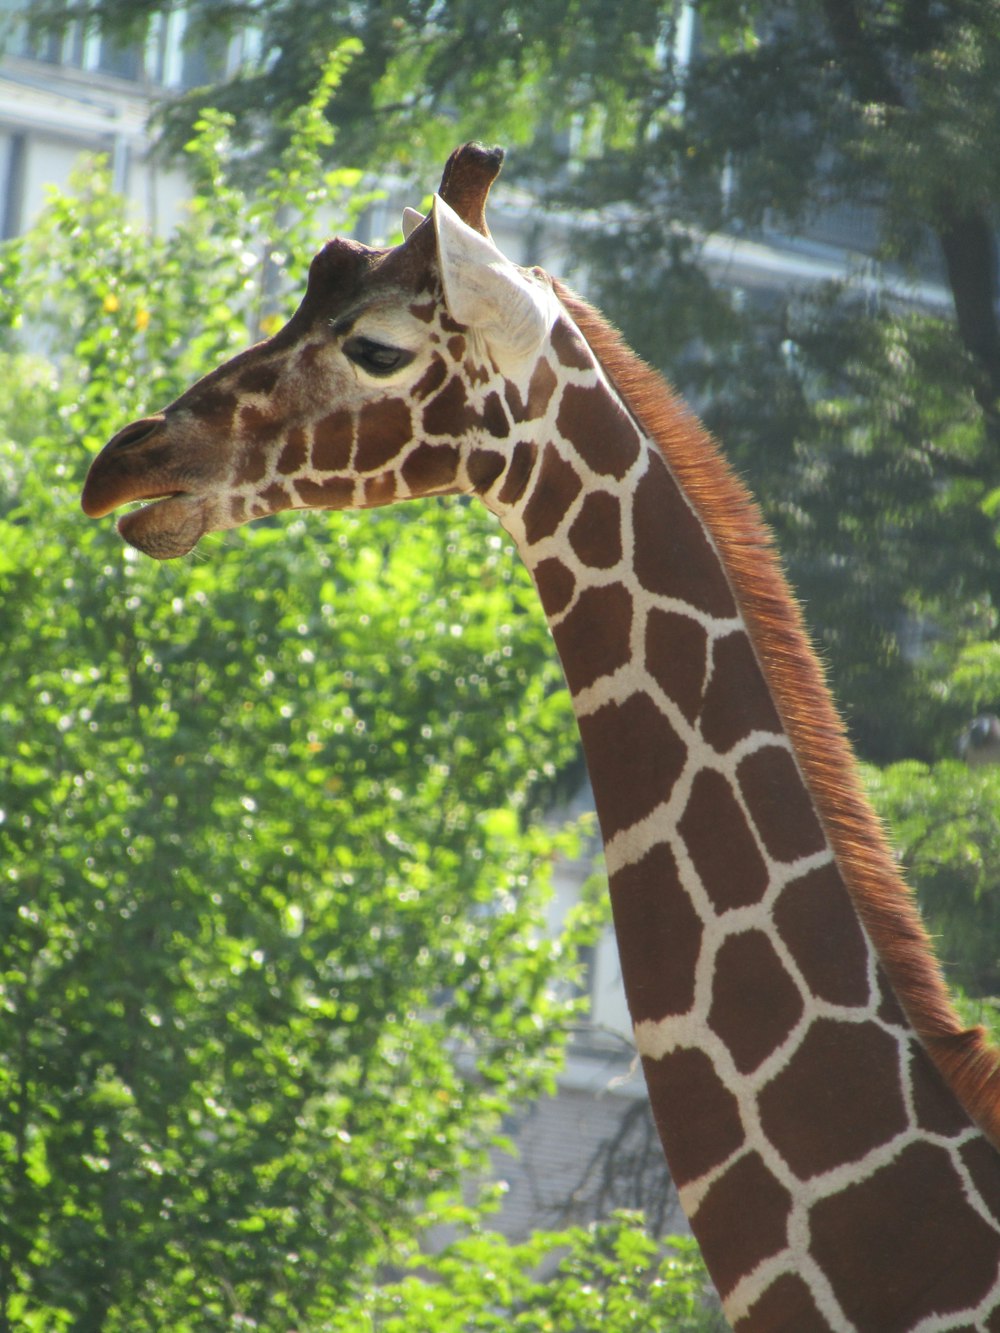 a giraffe standing in front of some trees